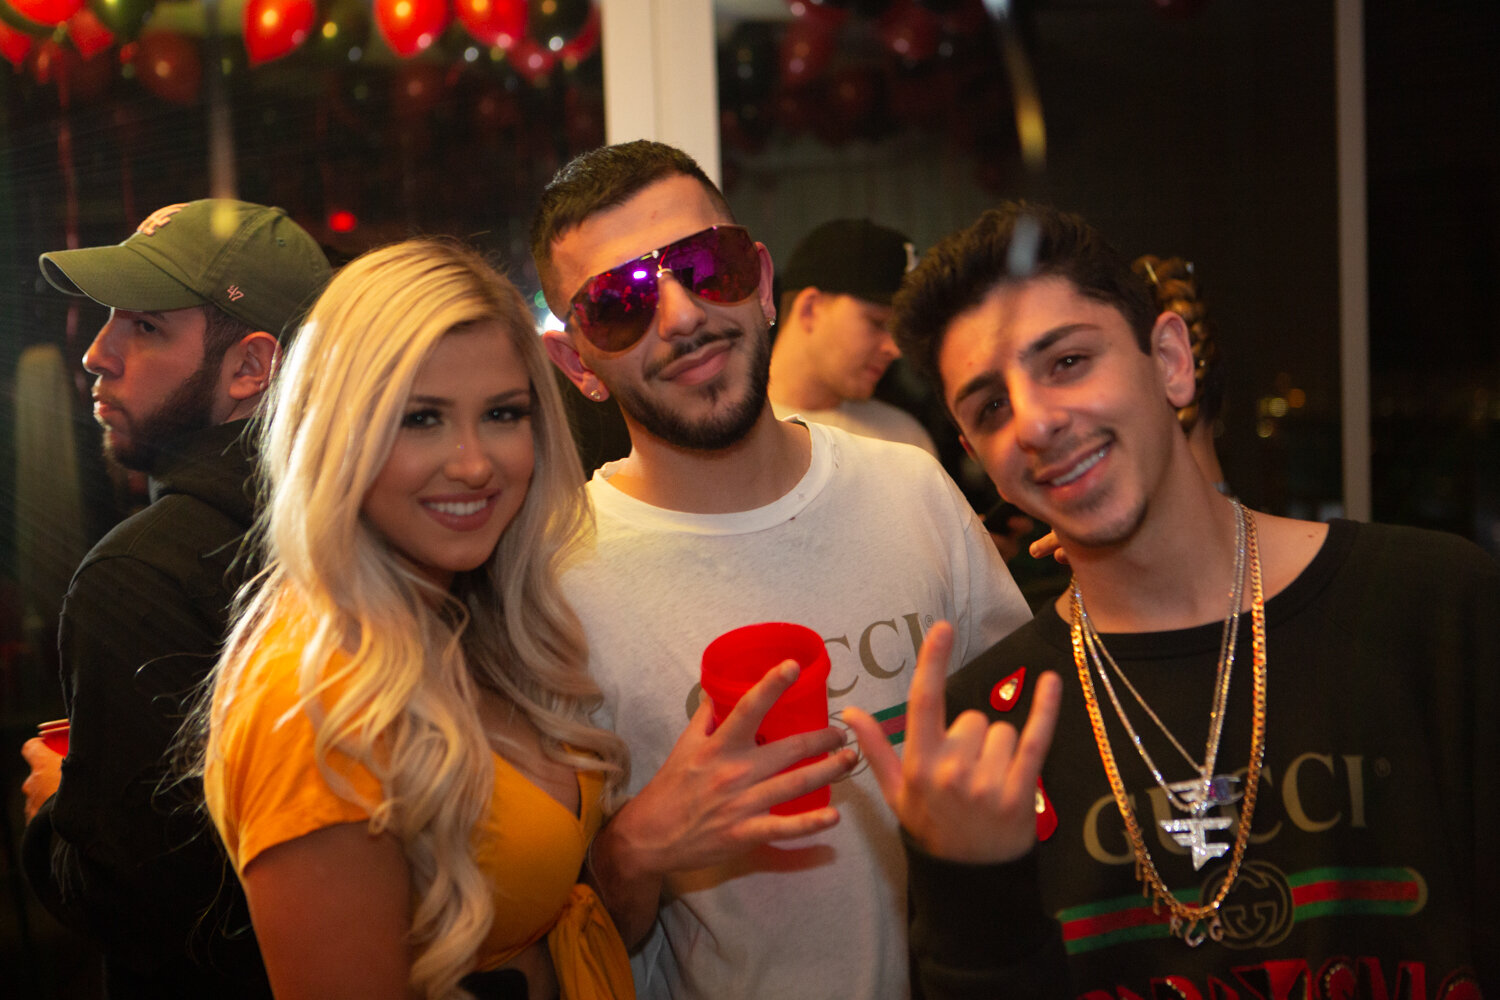 Faze Rug and Friends at Party